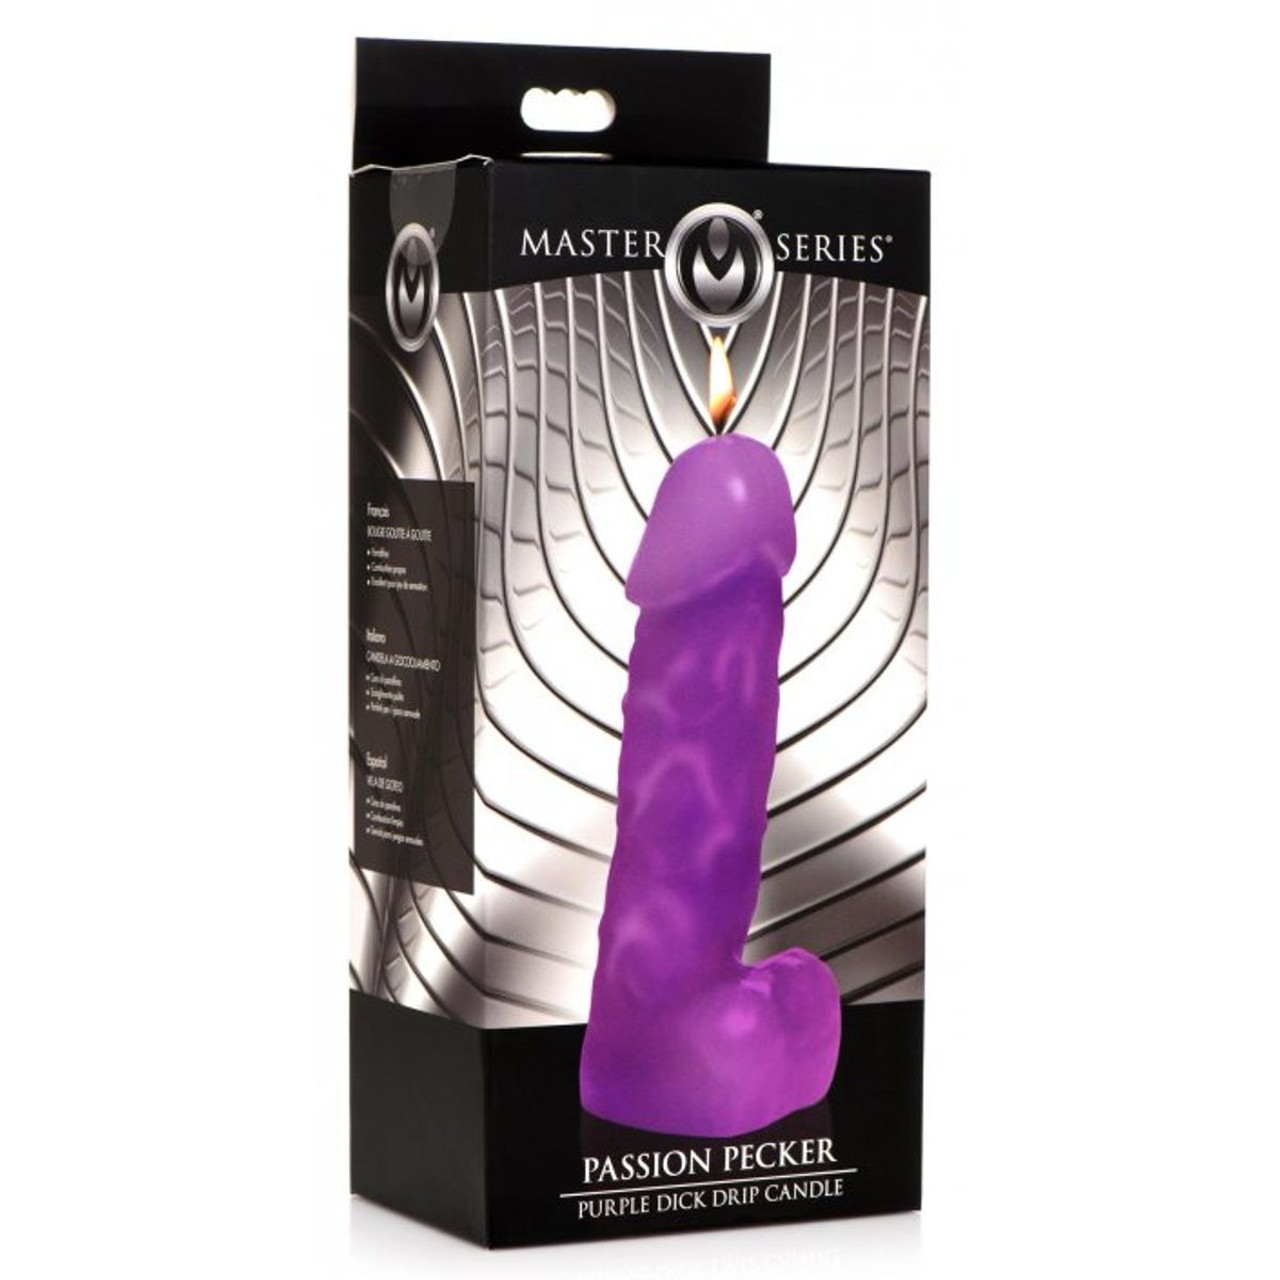 Master Series® Spicy Pecker Dick Drip Candle product image